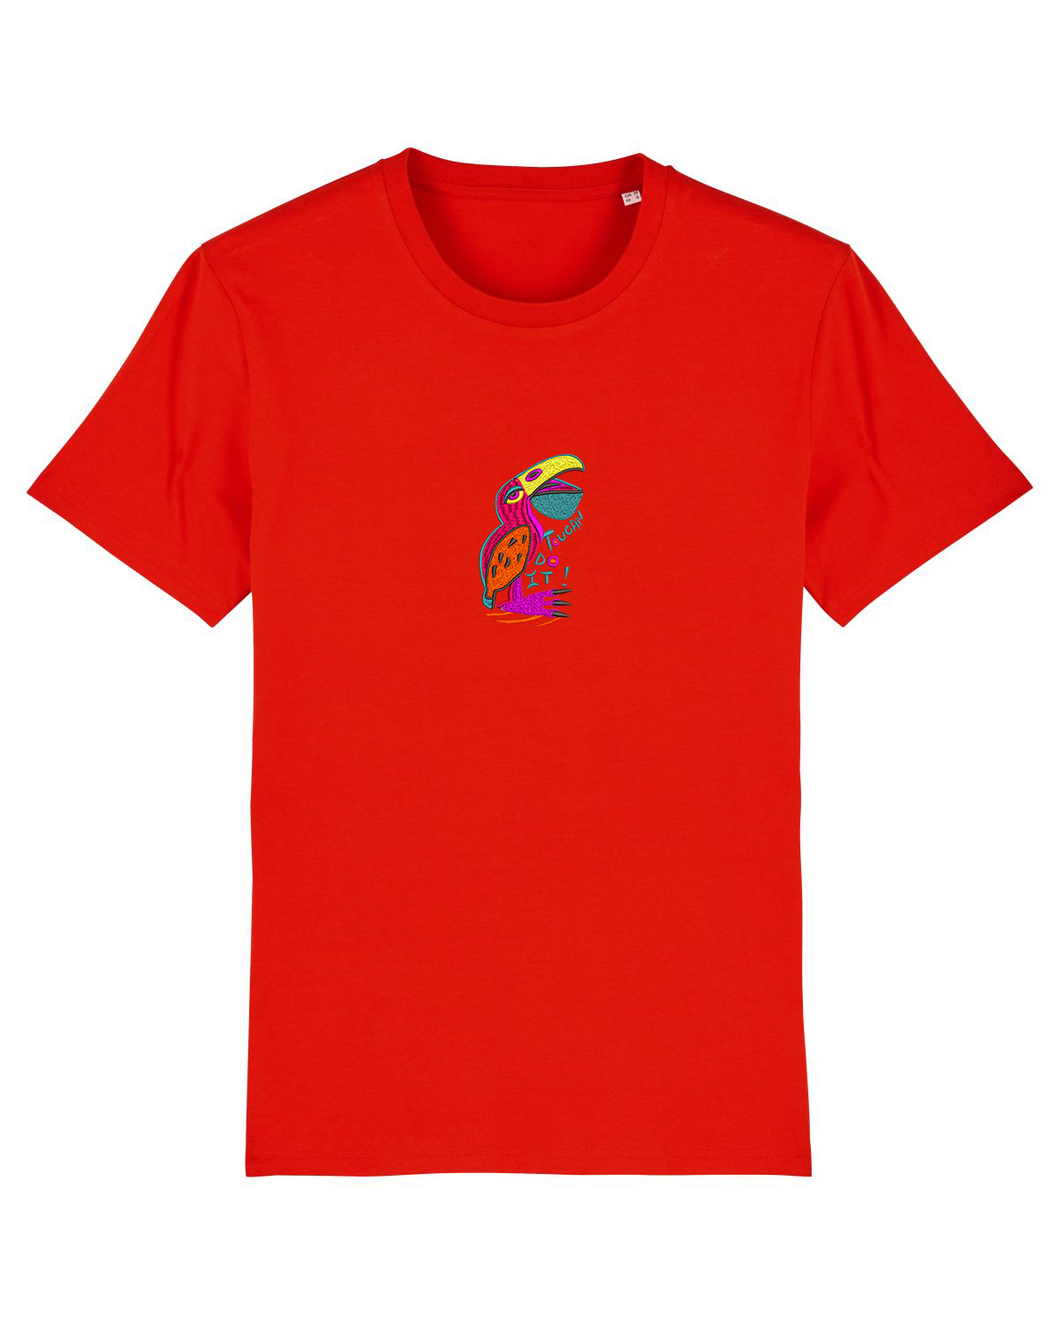 TOUCAN do it! 🐦- Embroidered unisex T-shirt